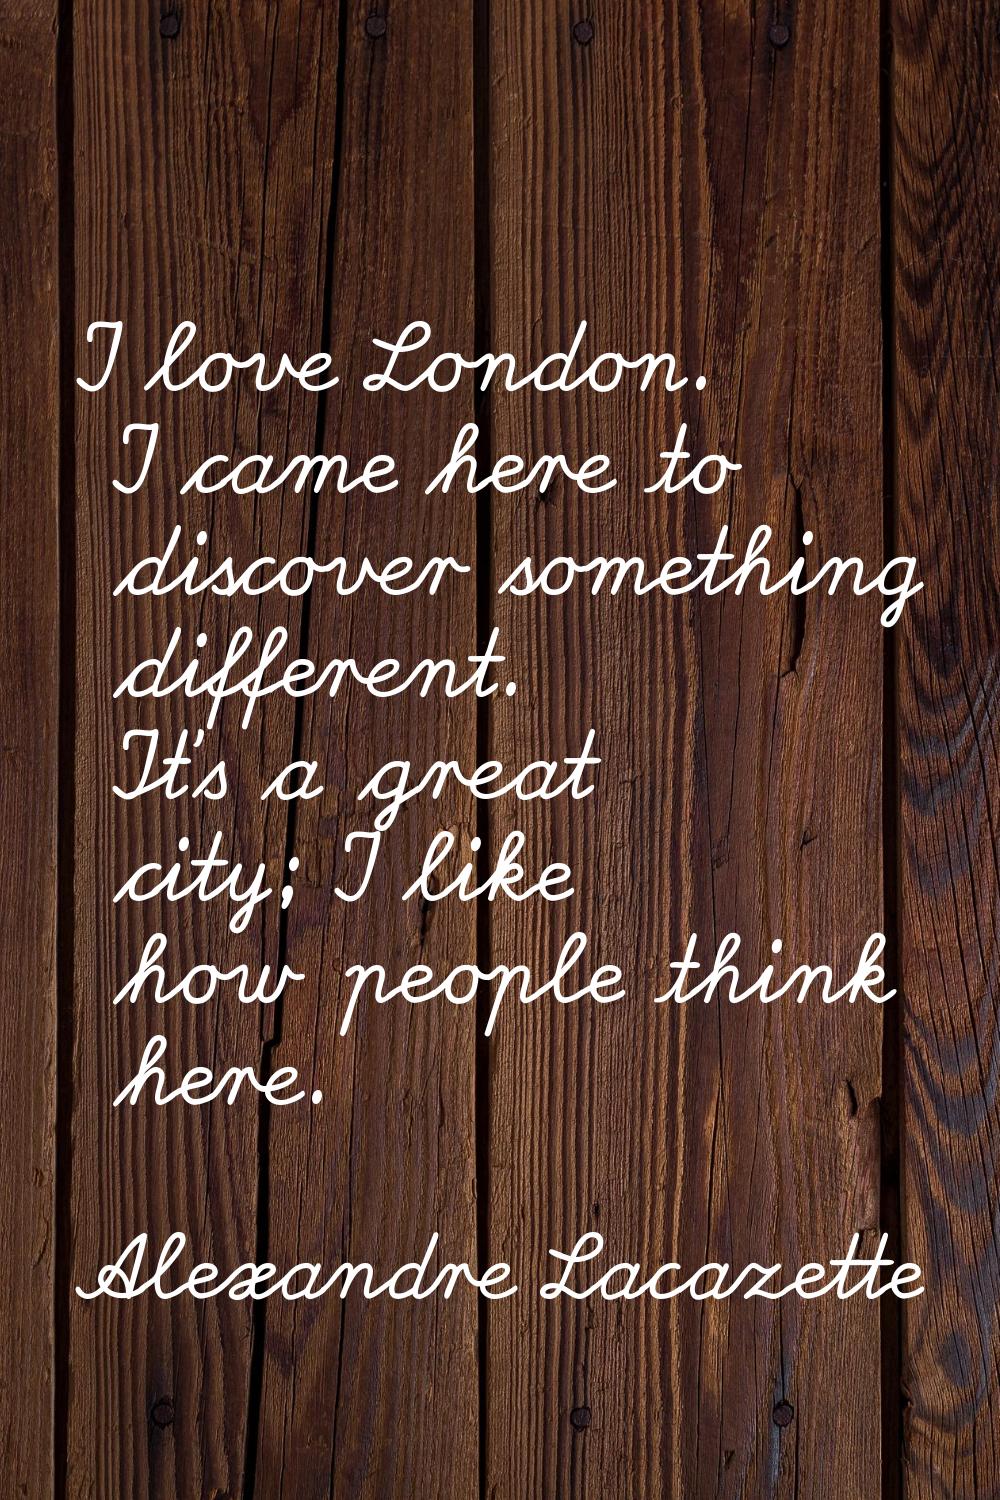 I love London. I came here to discover something different. It's a great city; I like how people th